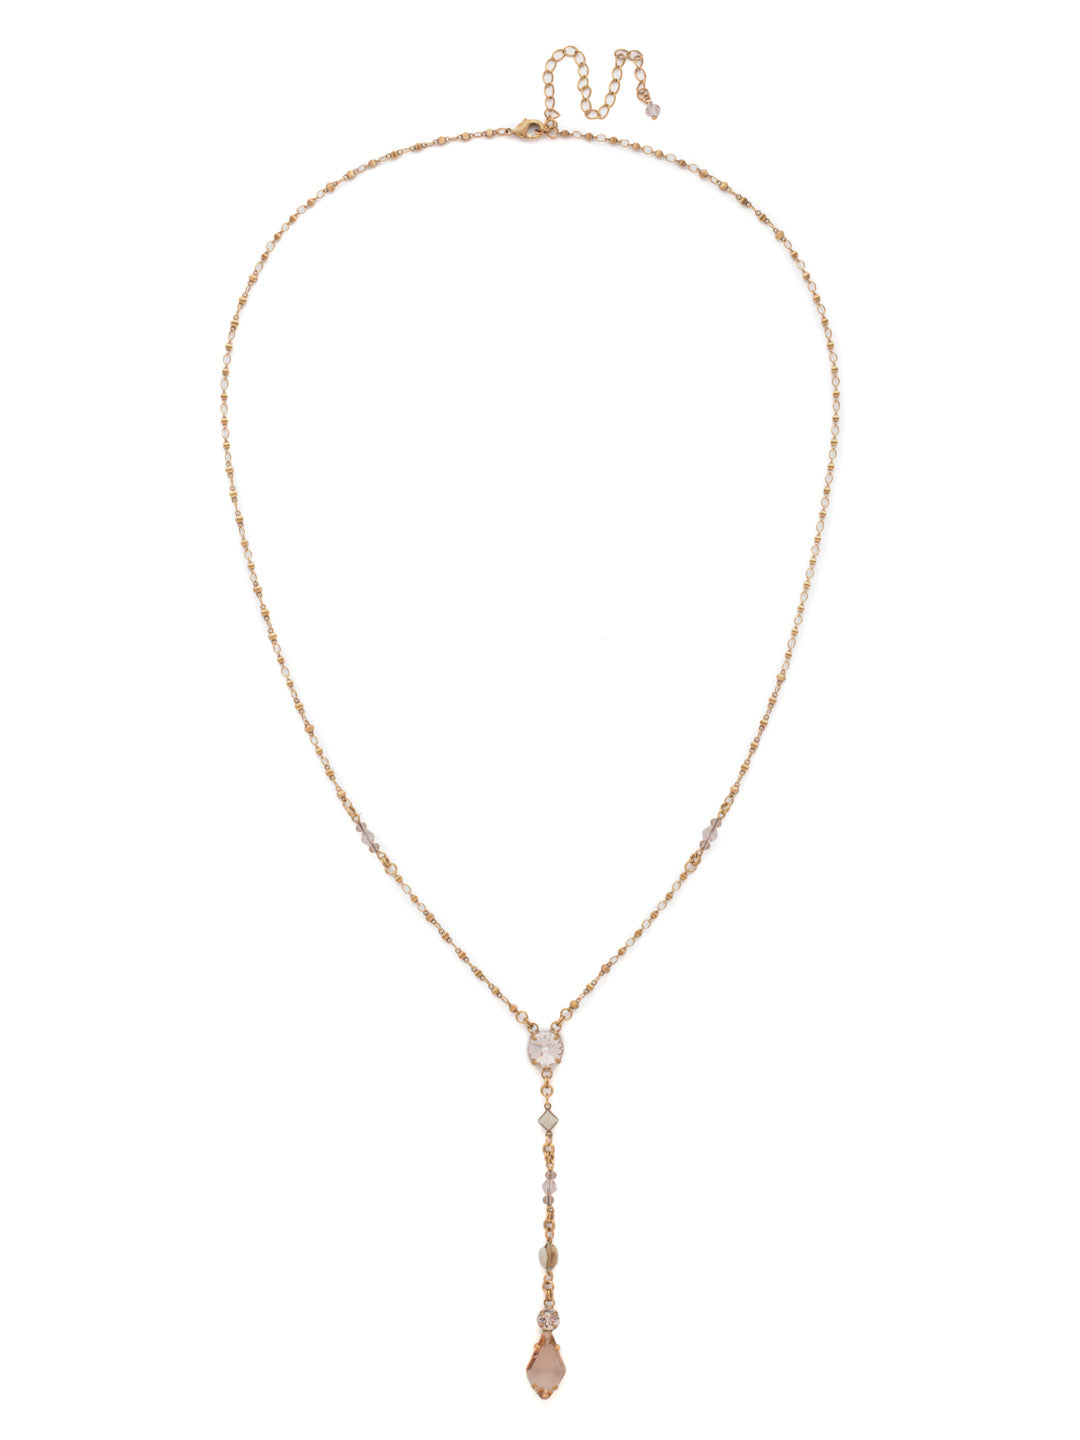 Regal Rhombus Y Pendant Necklace - NDK76AGAP - A modern take on a throwback style, this delicate design features an intricate design highlighting a beautiful rhombus cut crystal at the tip. Y not try the trend!